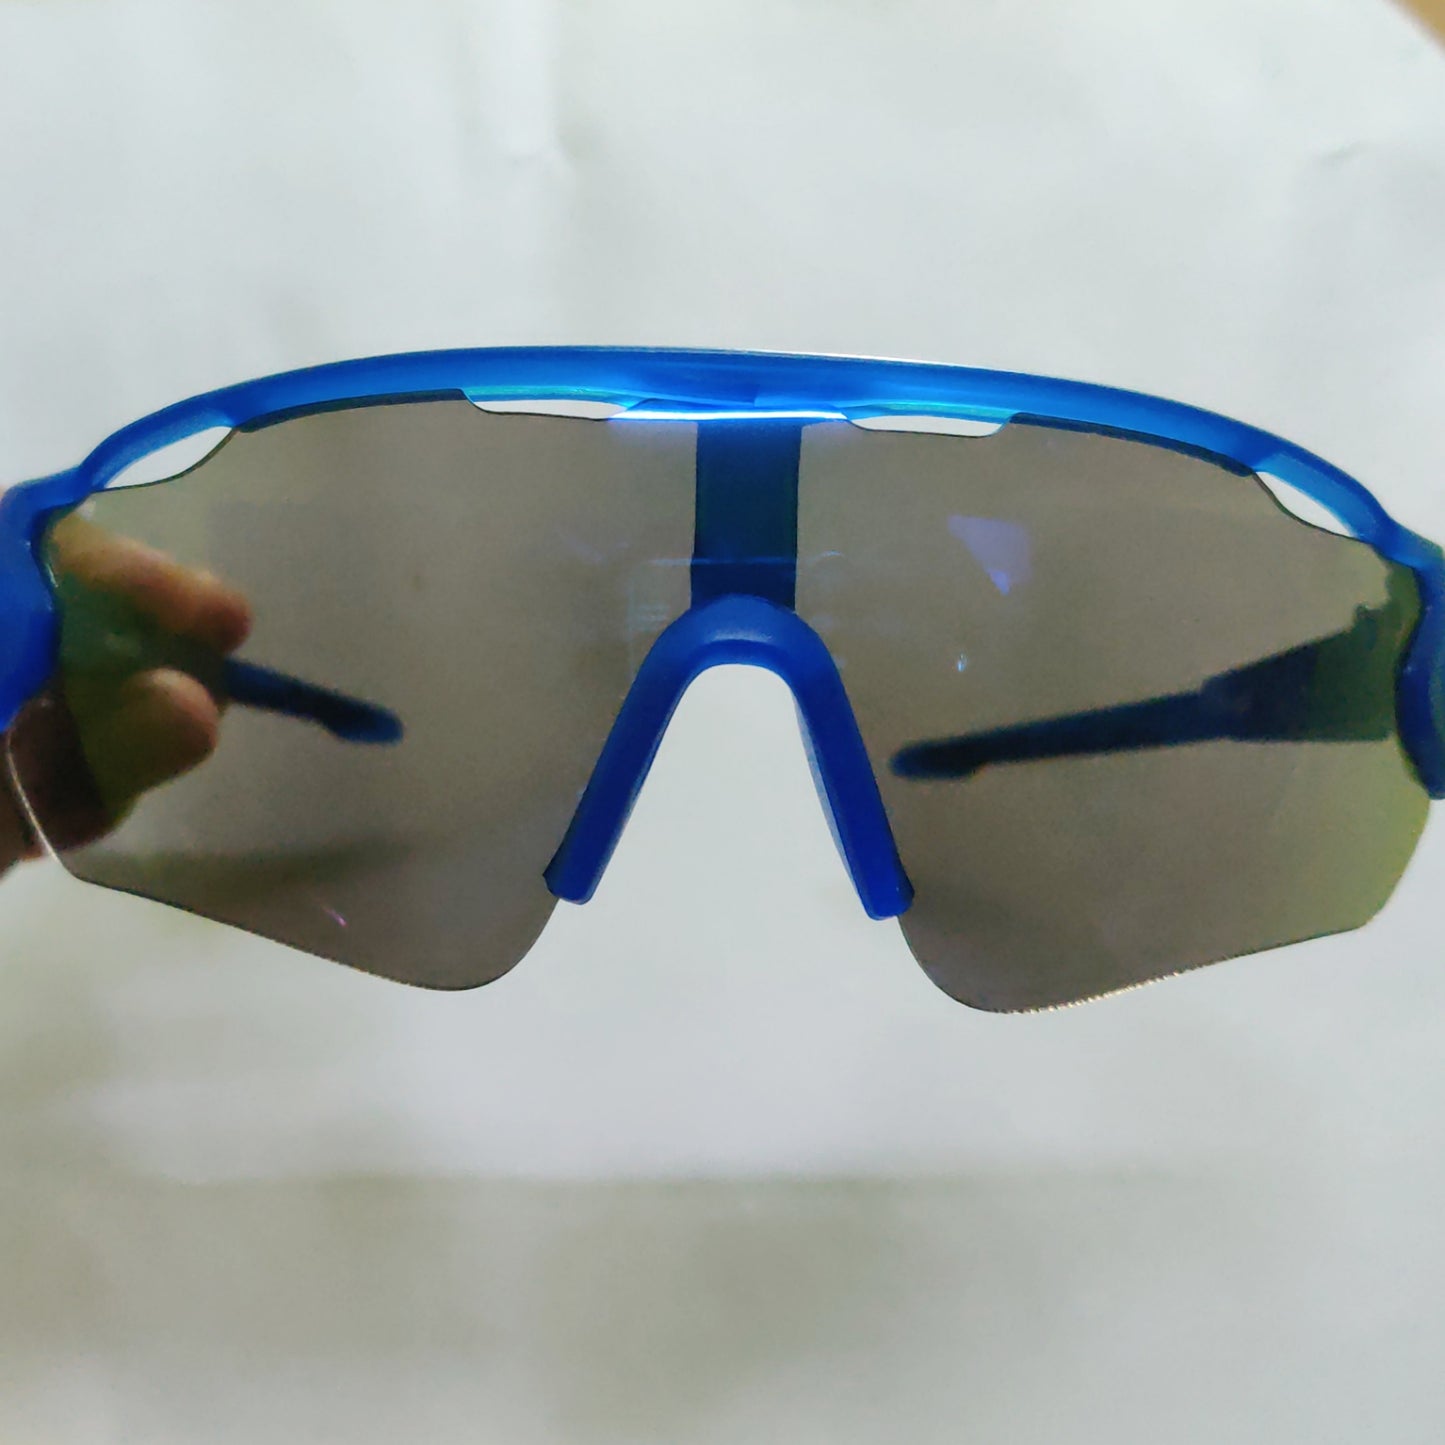 Allround Pro Sports Sunglasses with UV 400 Protection